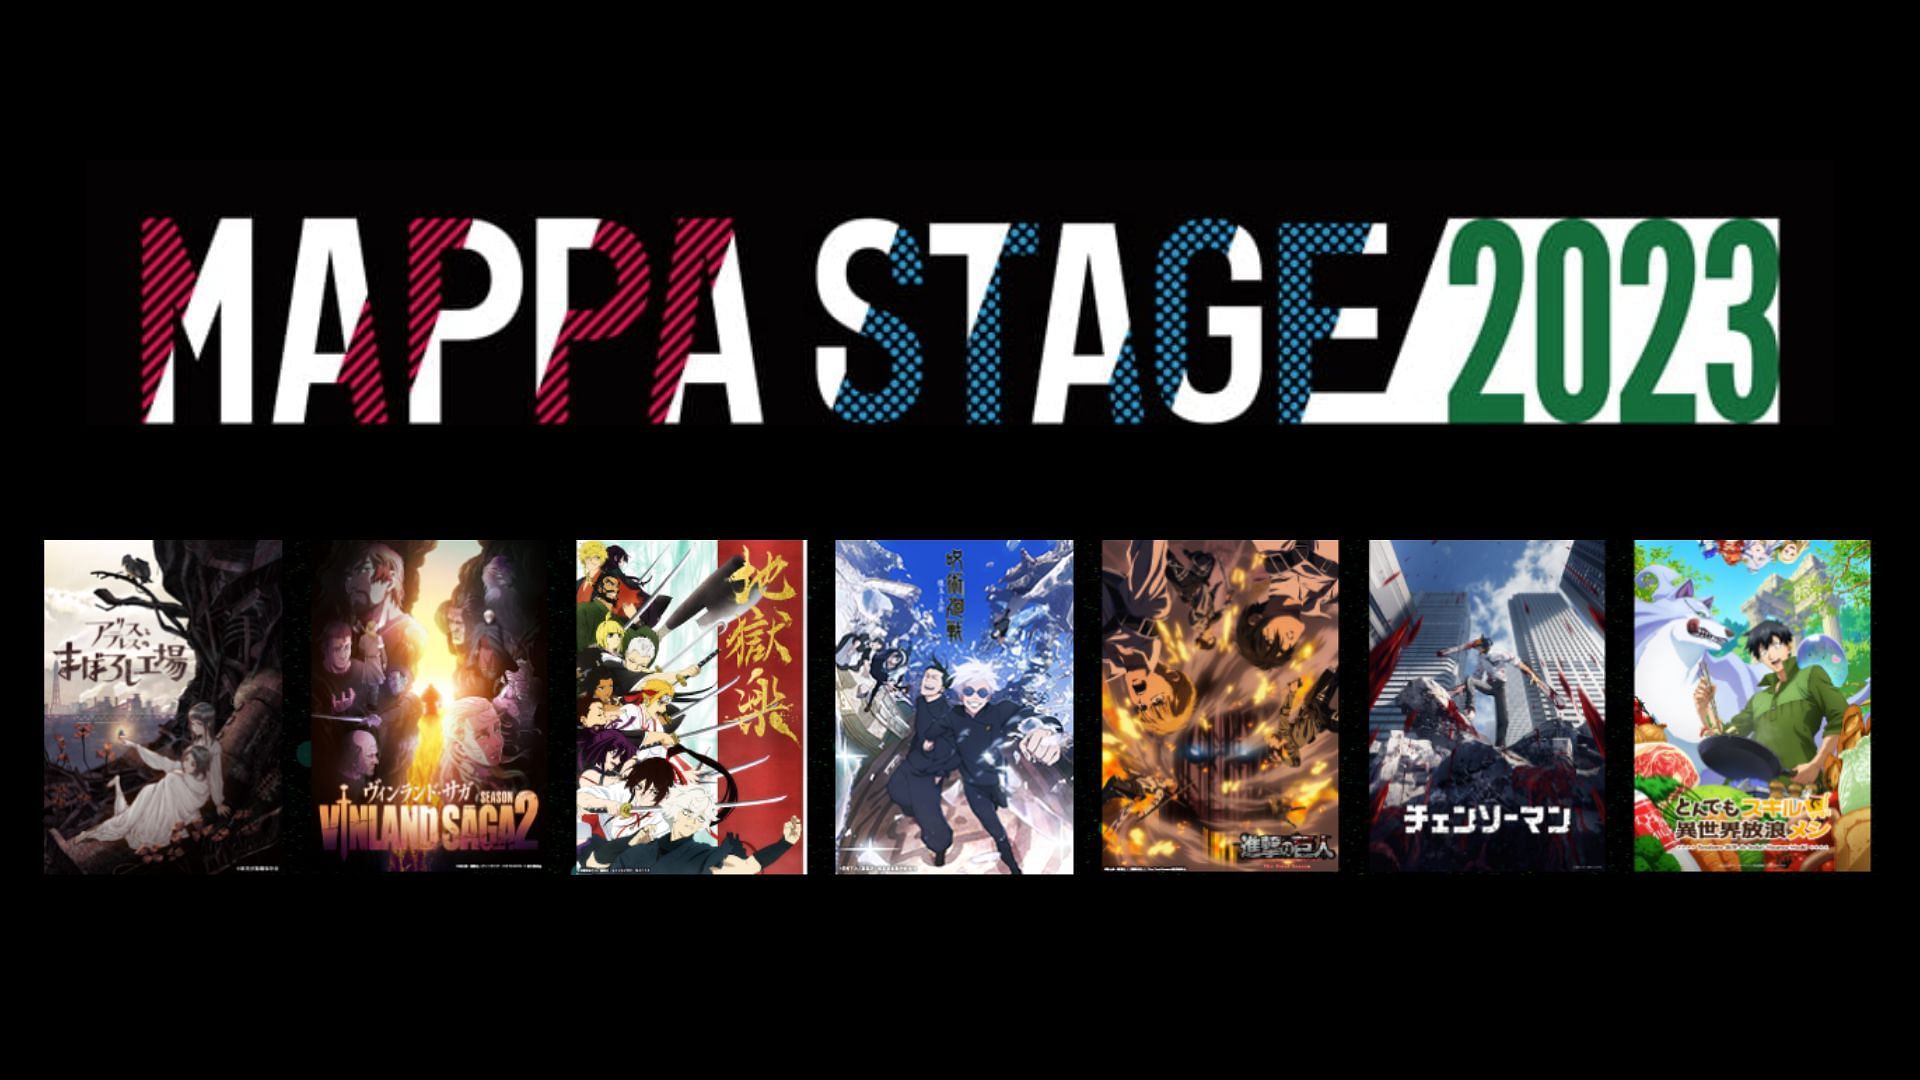 Mappa Stage 2023: Every announcement, release details and more (Image via Mappa)